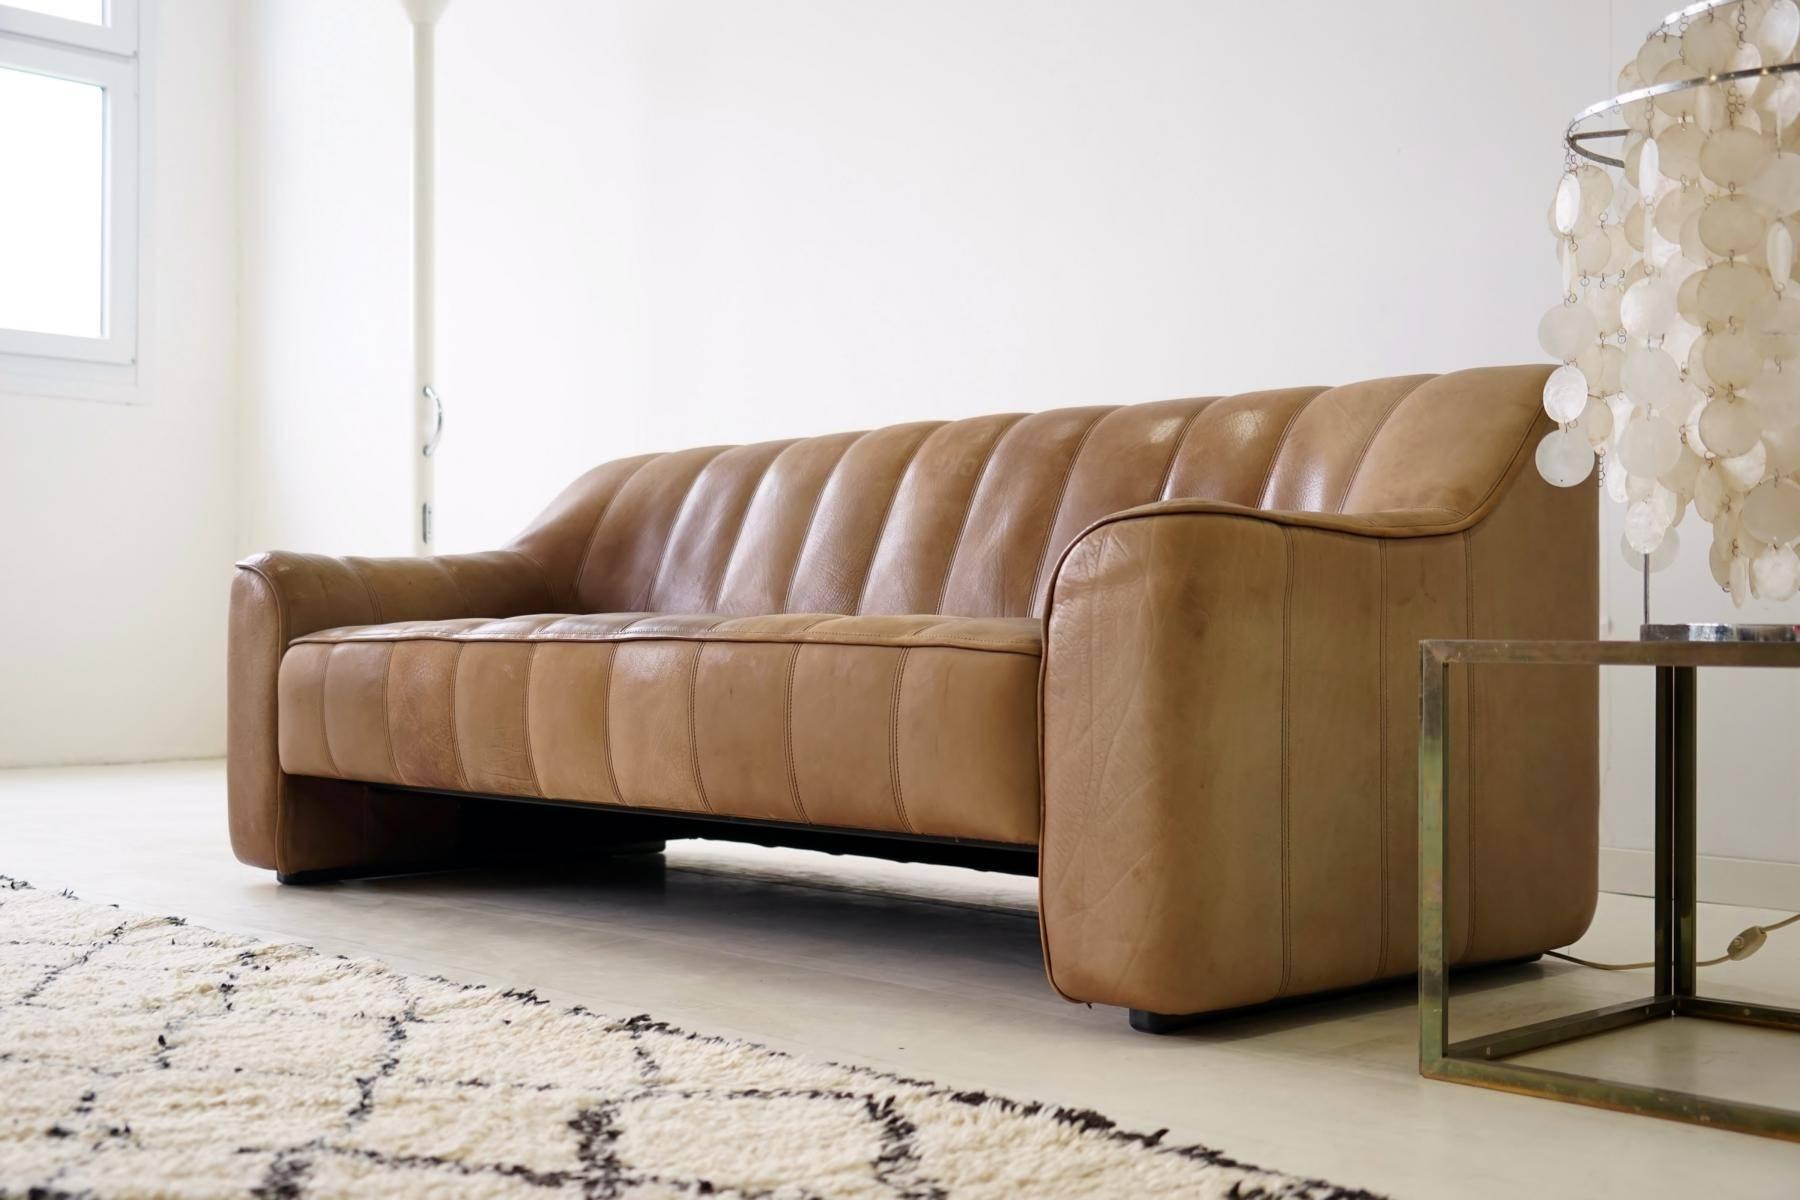 Swiss Three-Seat DS 44 Sofa by De Sede Neck Leather Extendable Seat